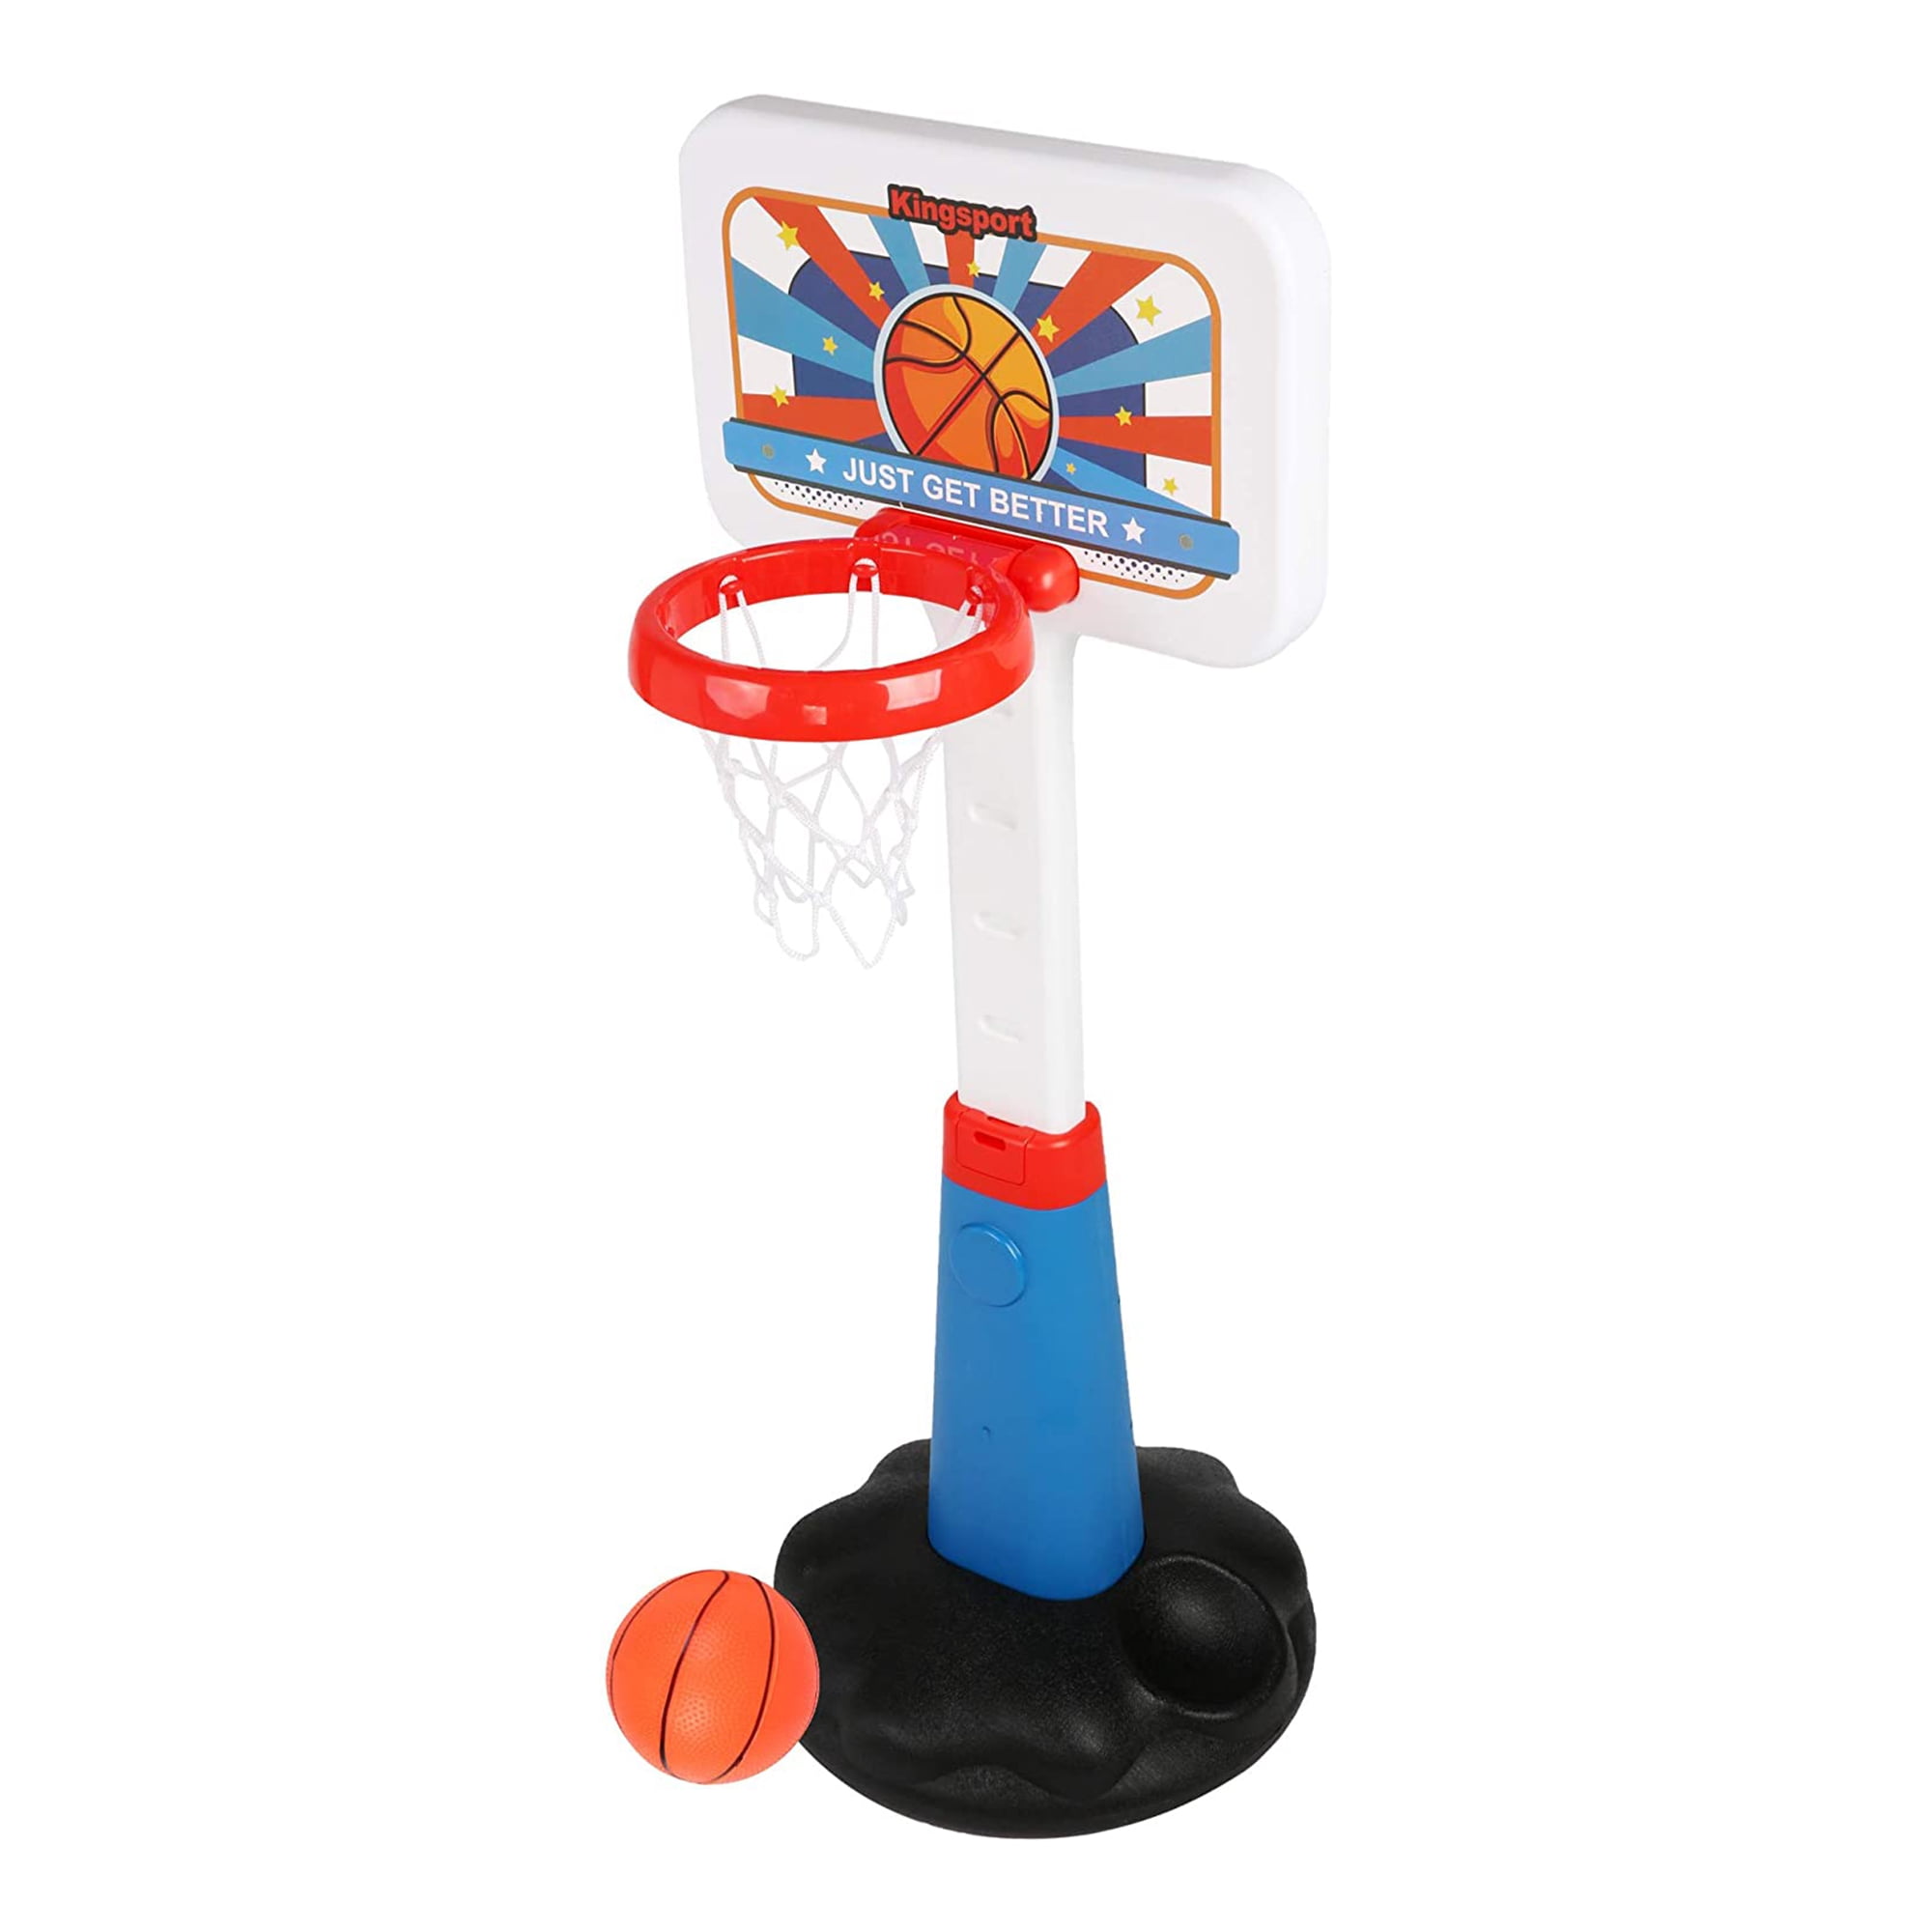 6.2 ft Basketball Hoop for Kids Stand Set,Adjustable Height 2.9 ft Mini Indoor Basketball Goal Toy with Ball Pump for Baby Kids Boys Girls Outdoor Play Sport for Age 3 4 5 6 7 8 Years Old 